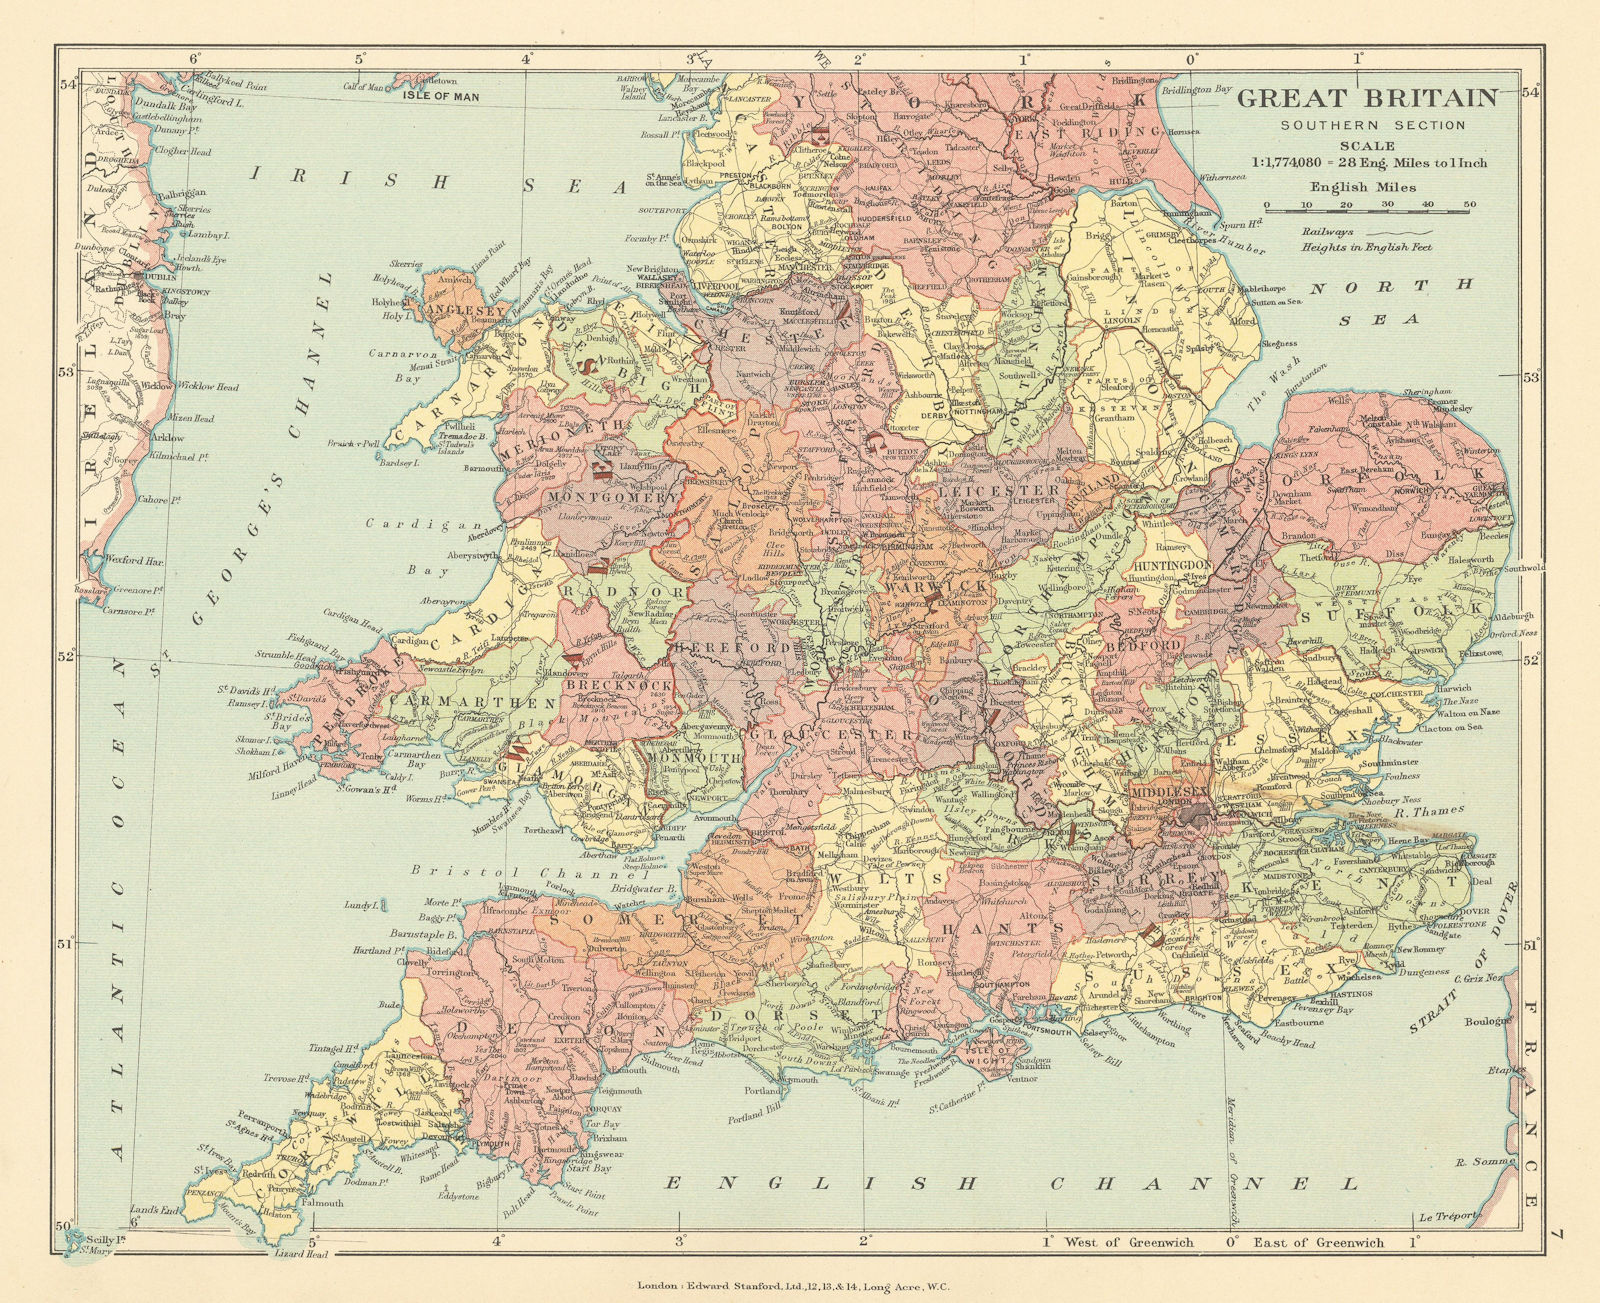 Great Britain, Southern Section. England & Wales in counties. STANFORD c1925 map